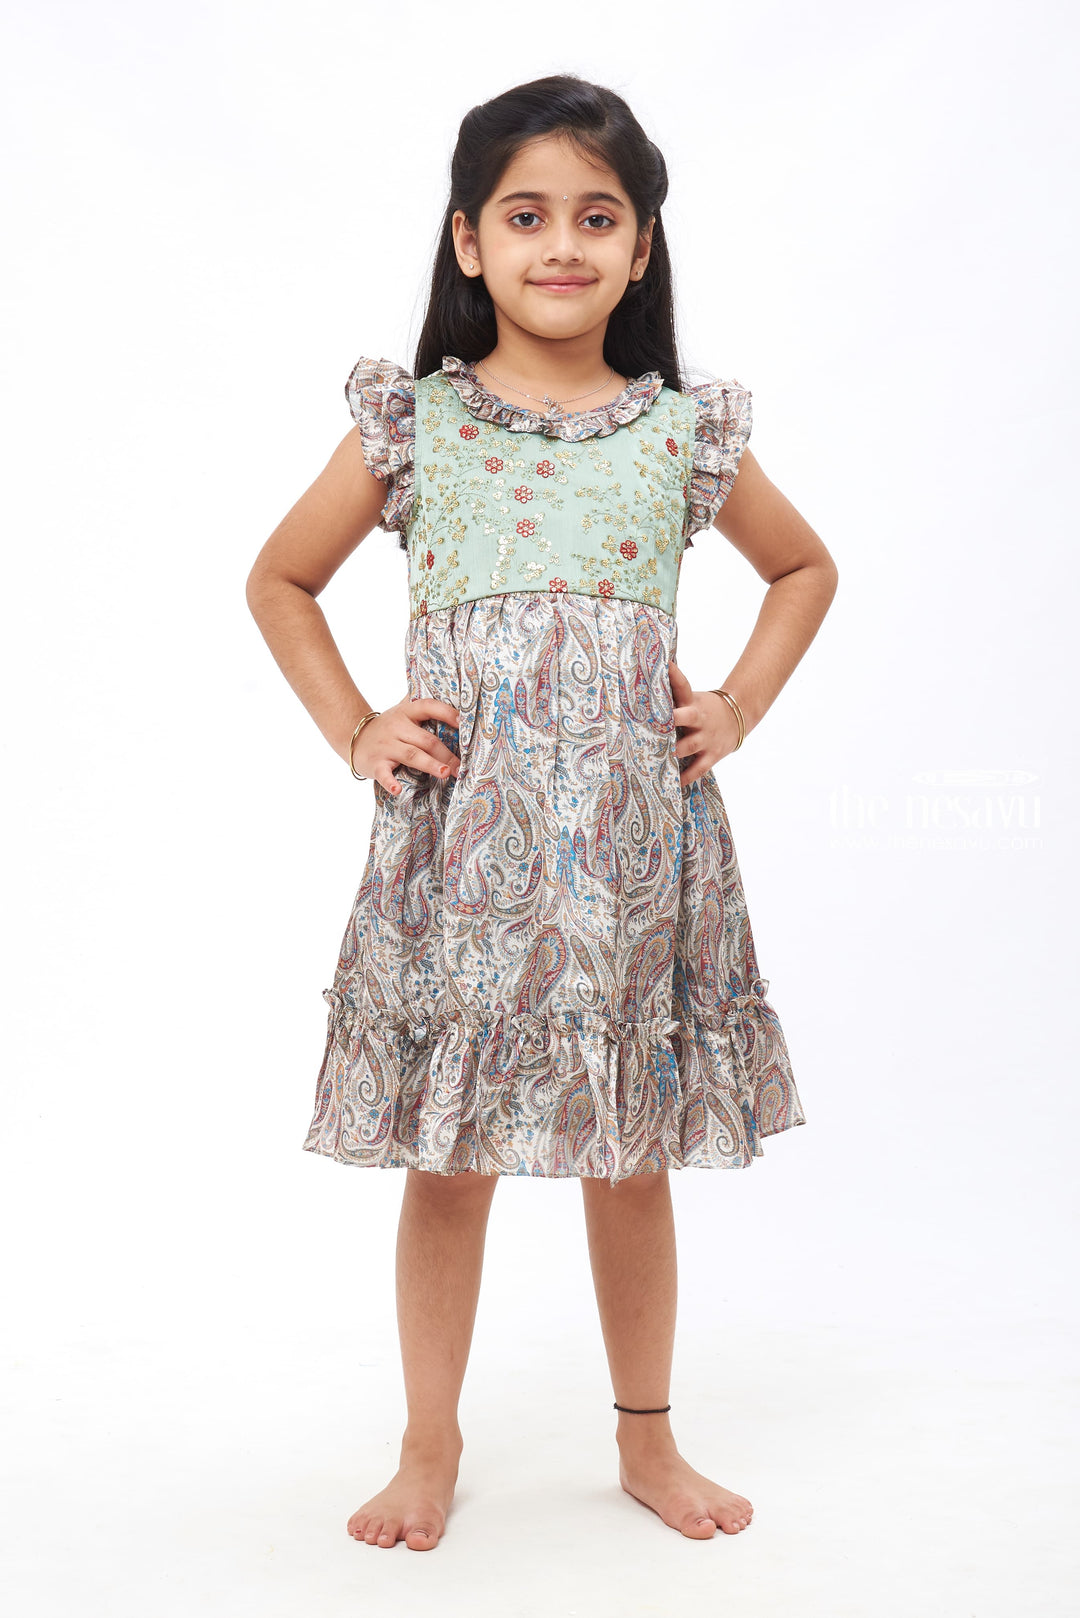 The Nesavu Girls Cotton Frock Elysian Paisley - Exquisite Sequin Embroidered Cotton Frock with Traditional Prints Nesavu 22 (4Y) / Green / Cotton GFC1178A-22 The Beauty of Simplicity | Timeless Cotton Frocks for Girls | The Nesavu